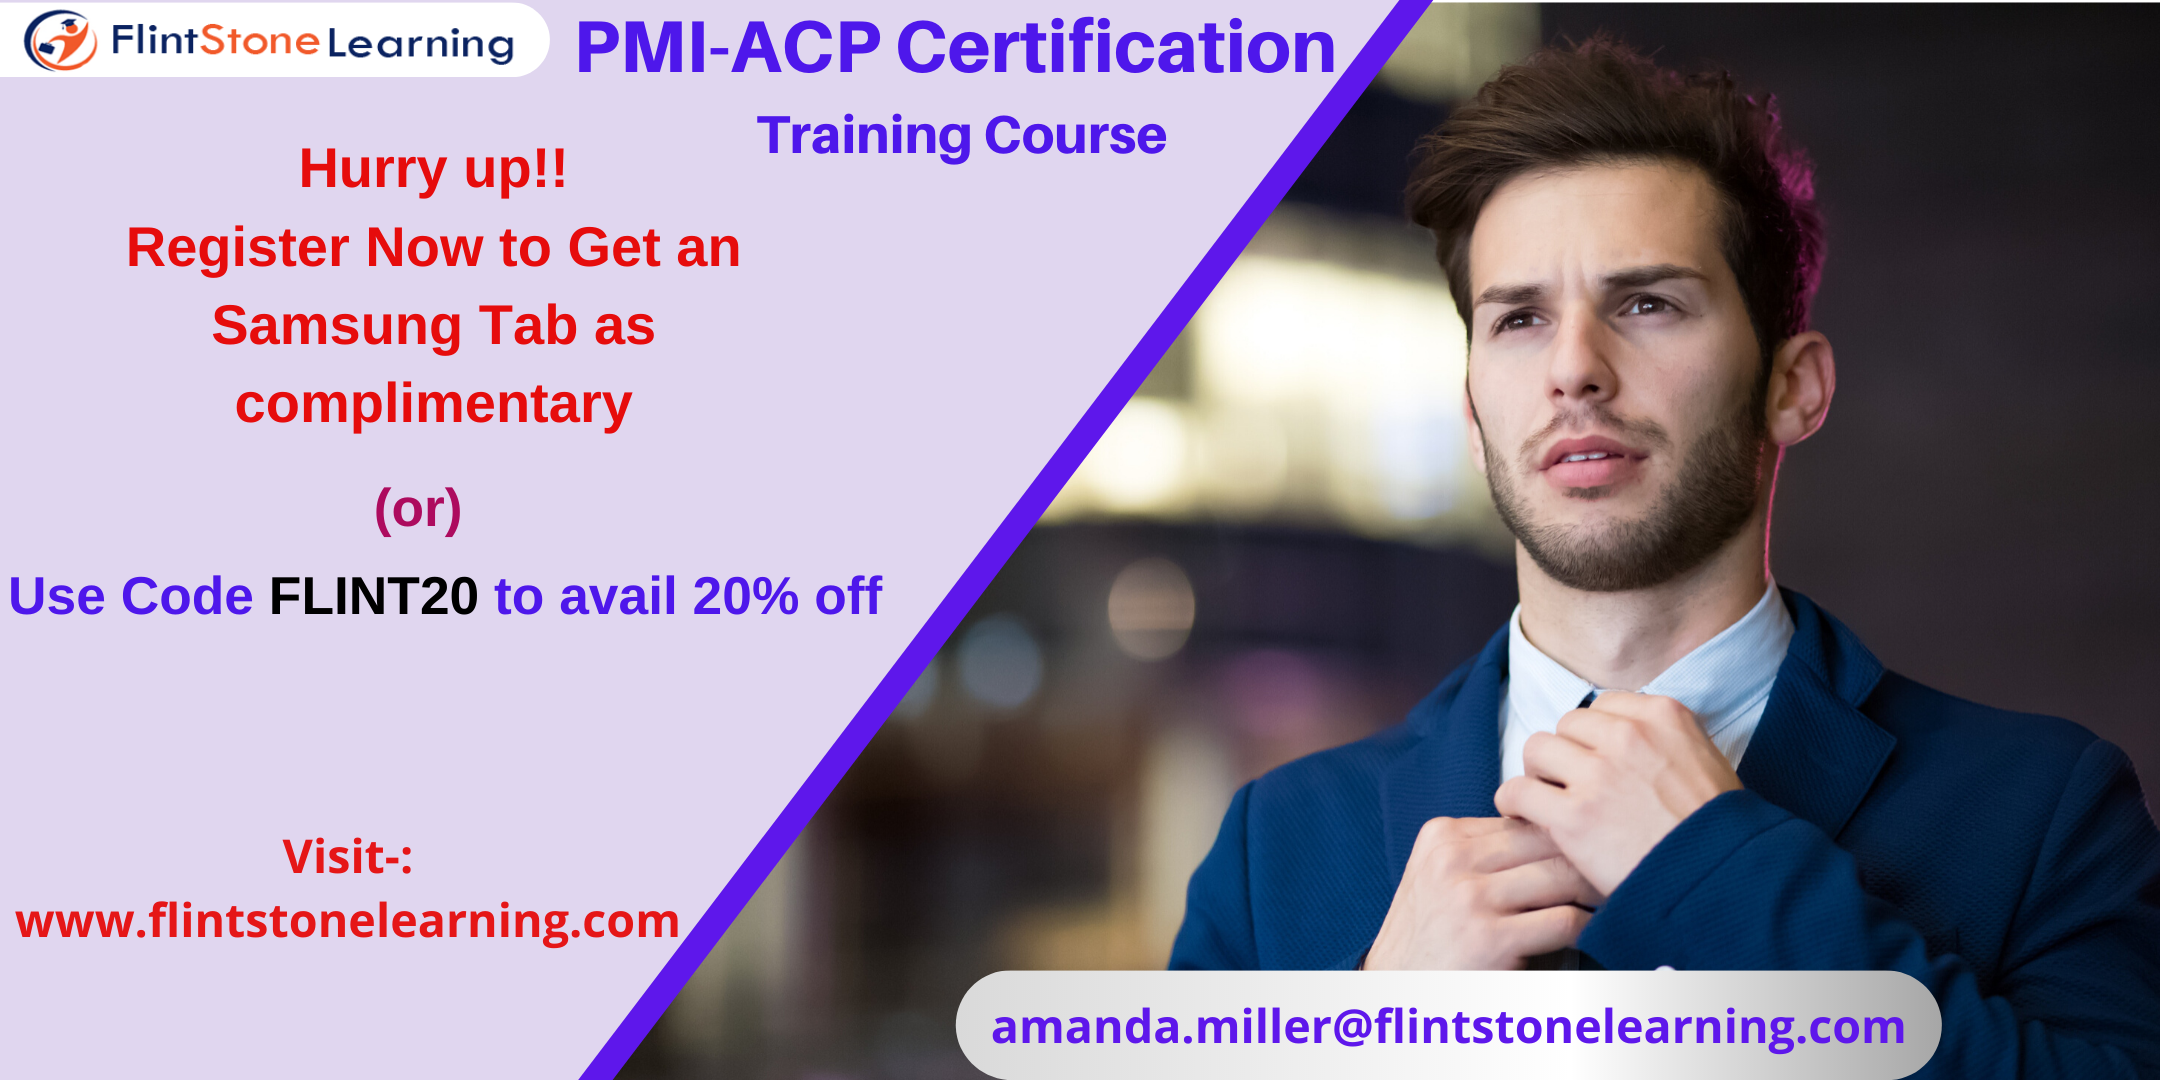 PMI-ACP Certification Training Course in Carlsbad, CA